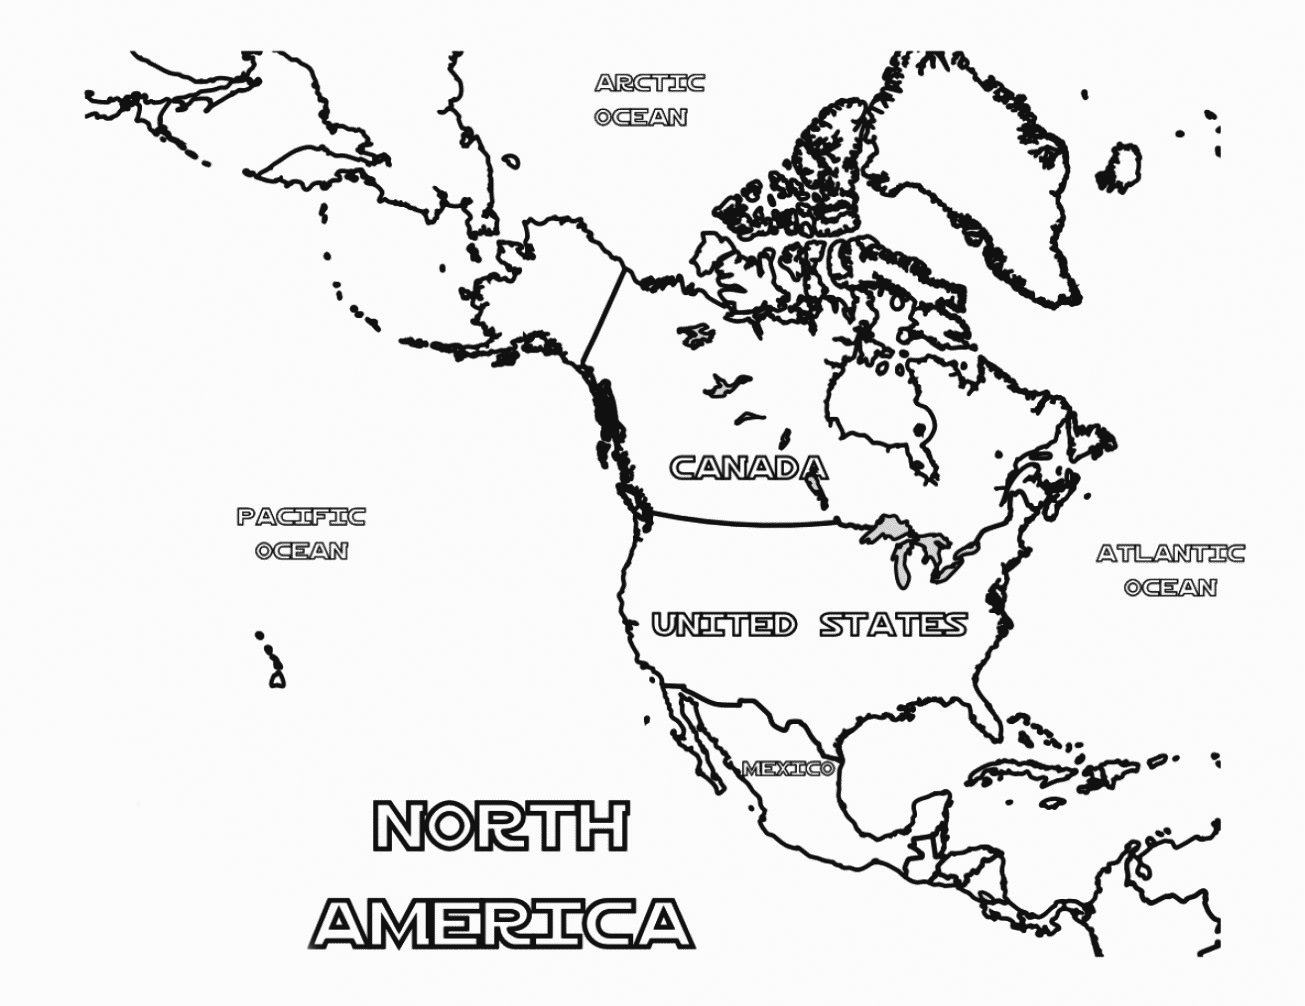 US Map Coloring Pages - Best Coloring Pages For Kids